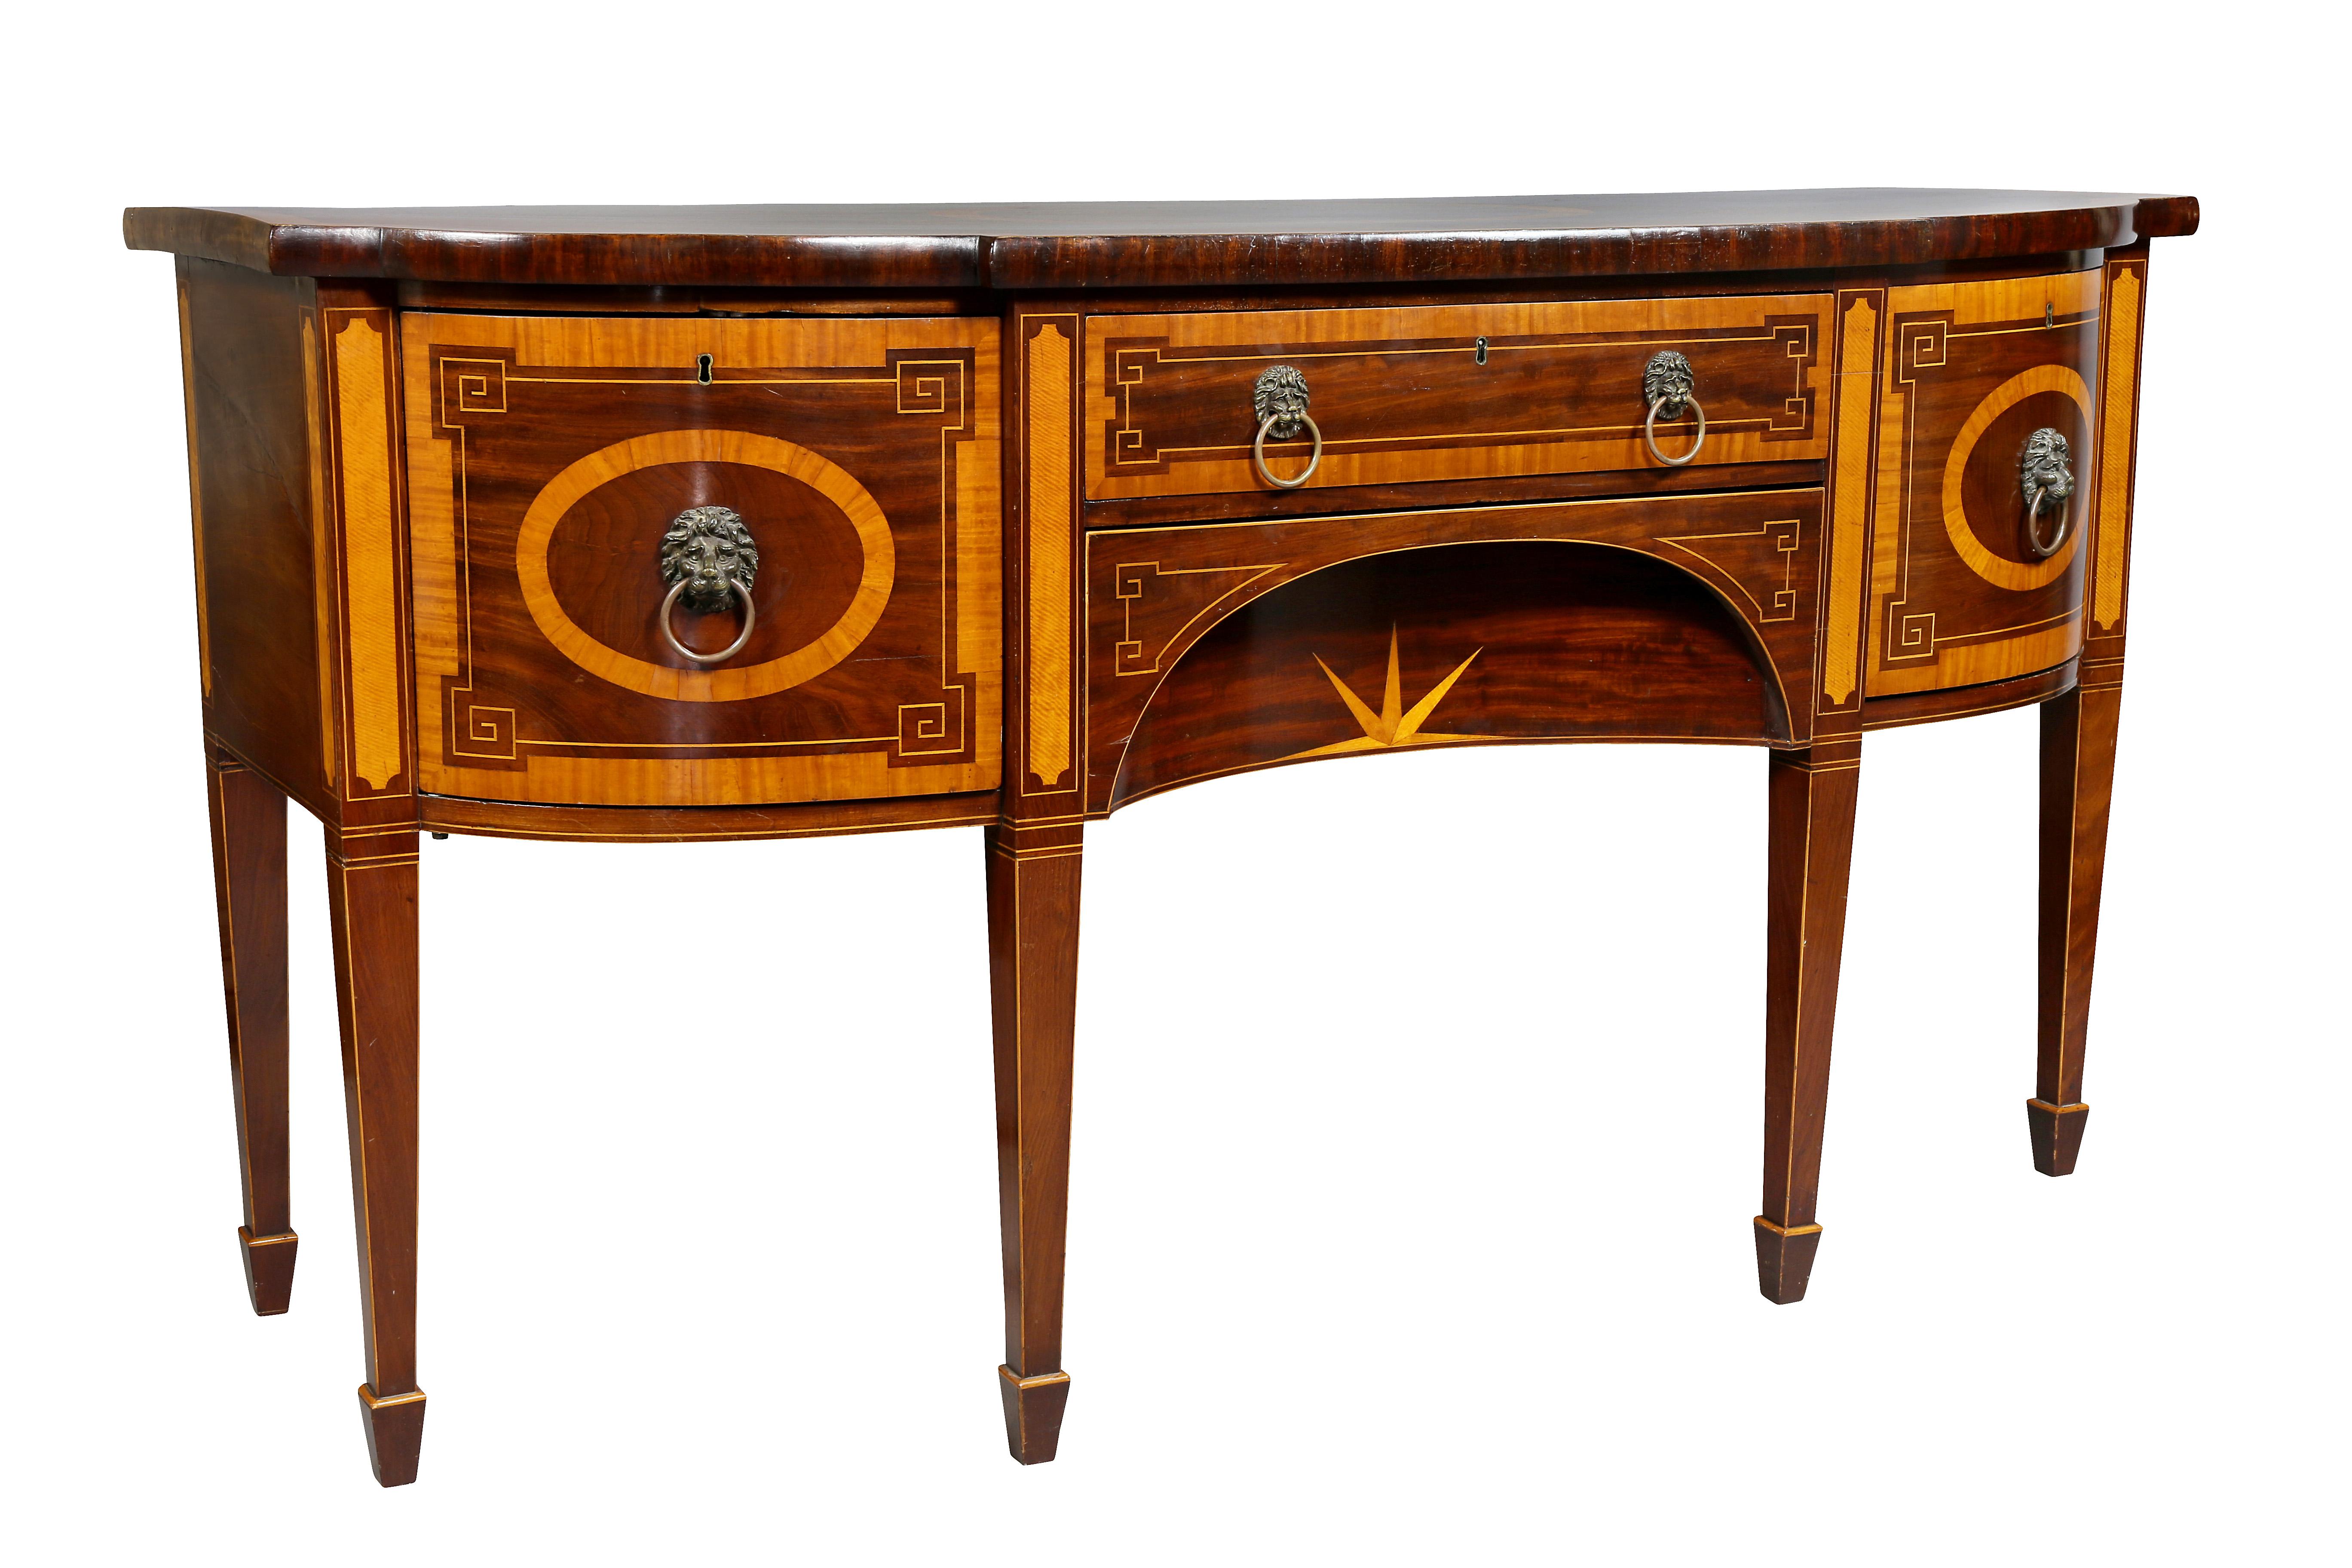 Bowed top with squared corners and central oval inlay and banded edge over a pair of cabinet doors and a central drawer and lower drawer with sunburst inlay, raised on square tapered legs, spade feet.